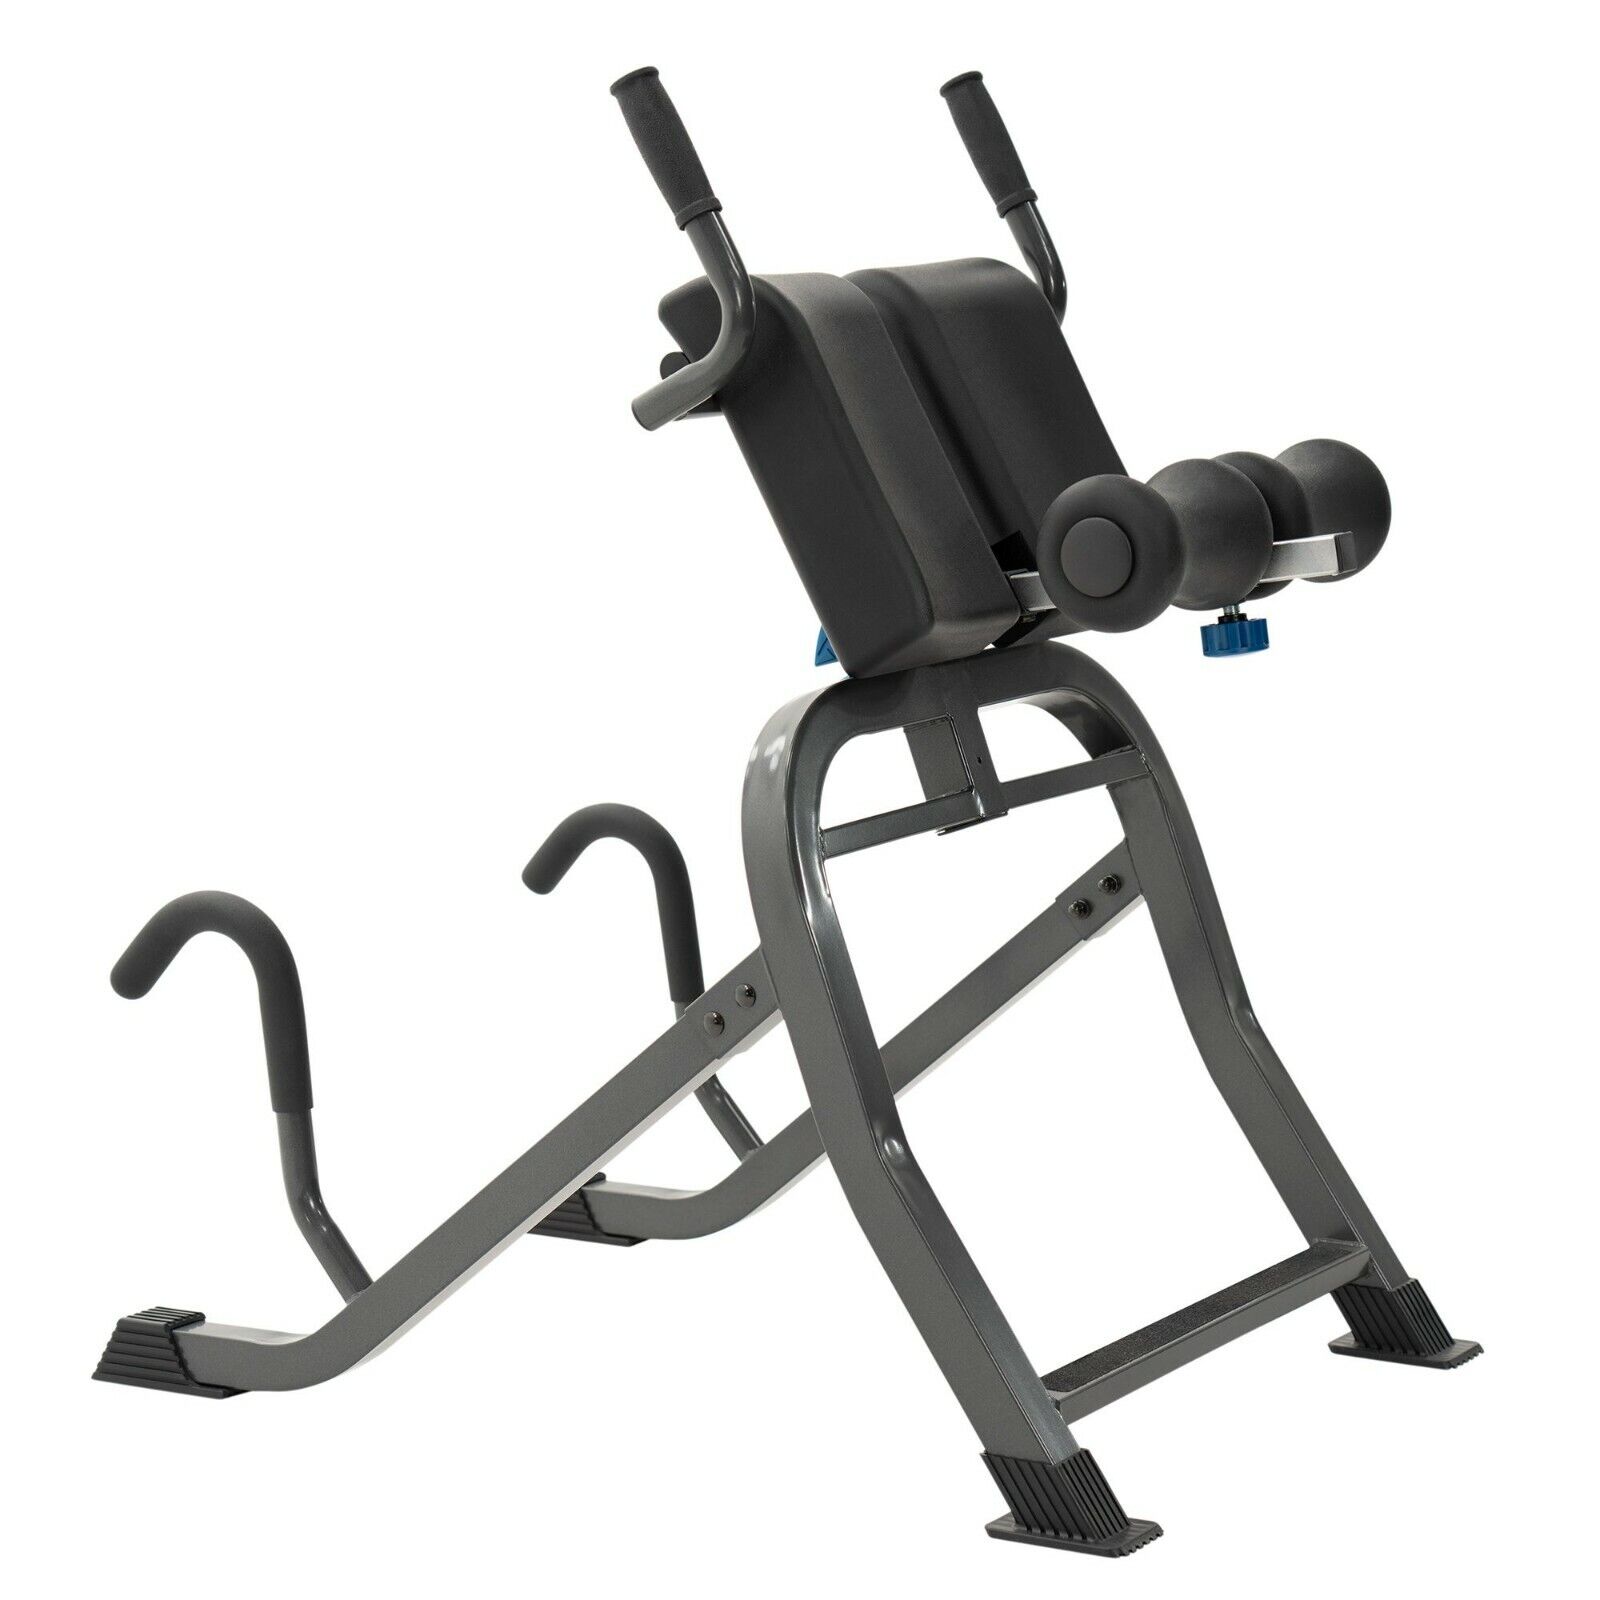 Teeter DEX II Exercise & Inversion System Blem D13004- Great